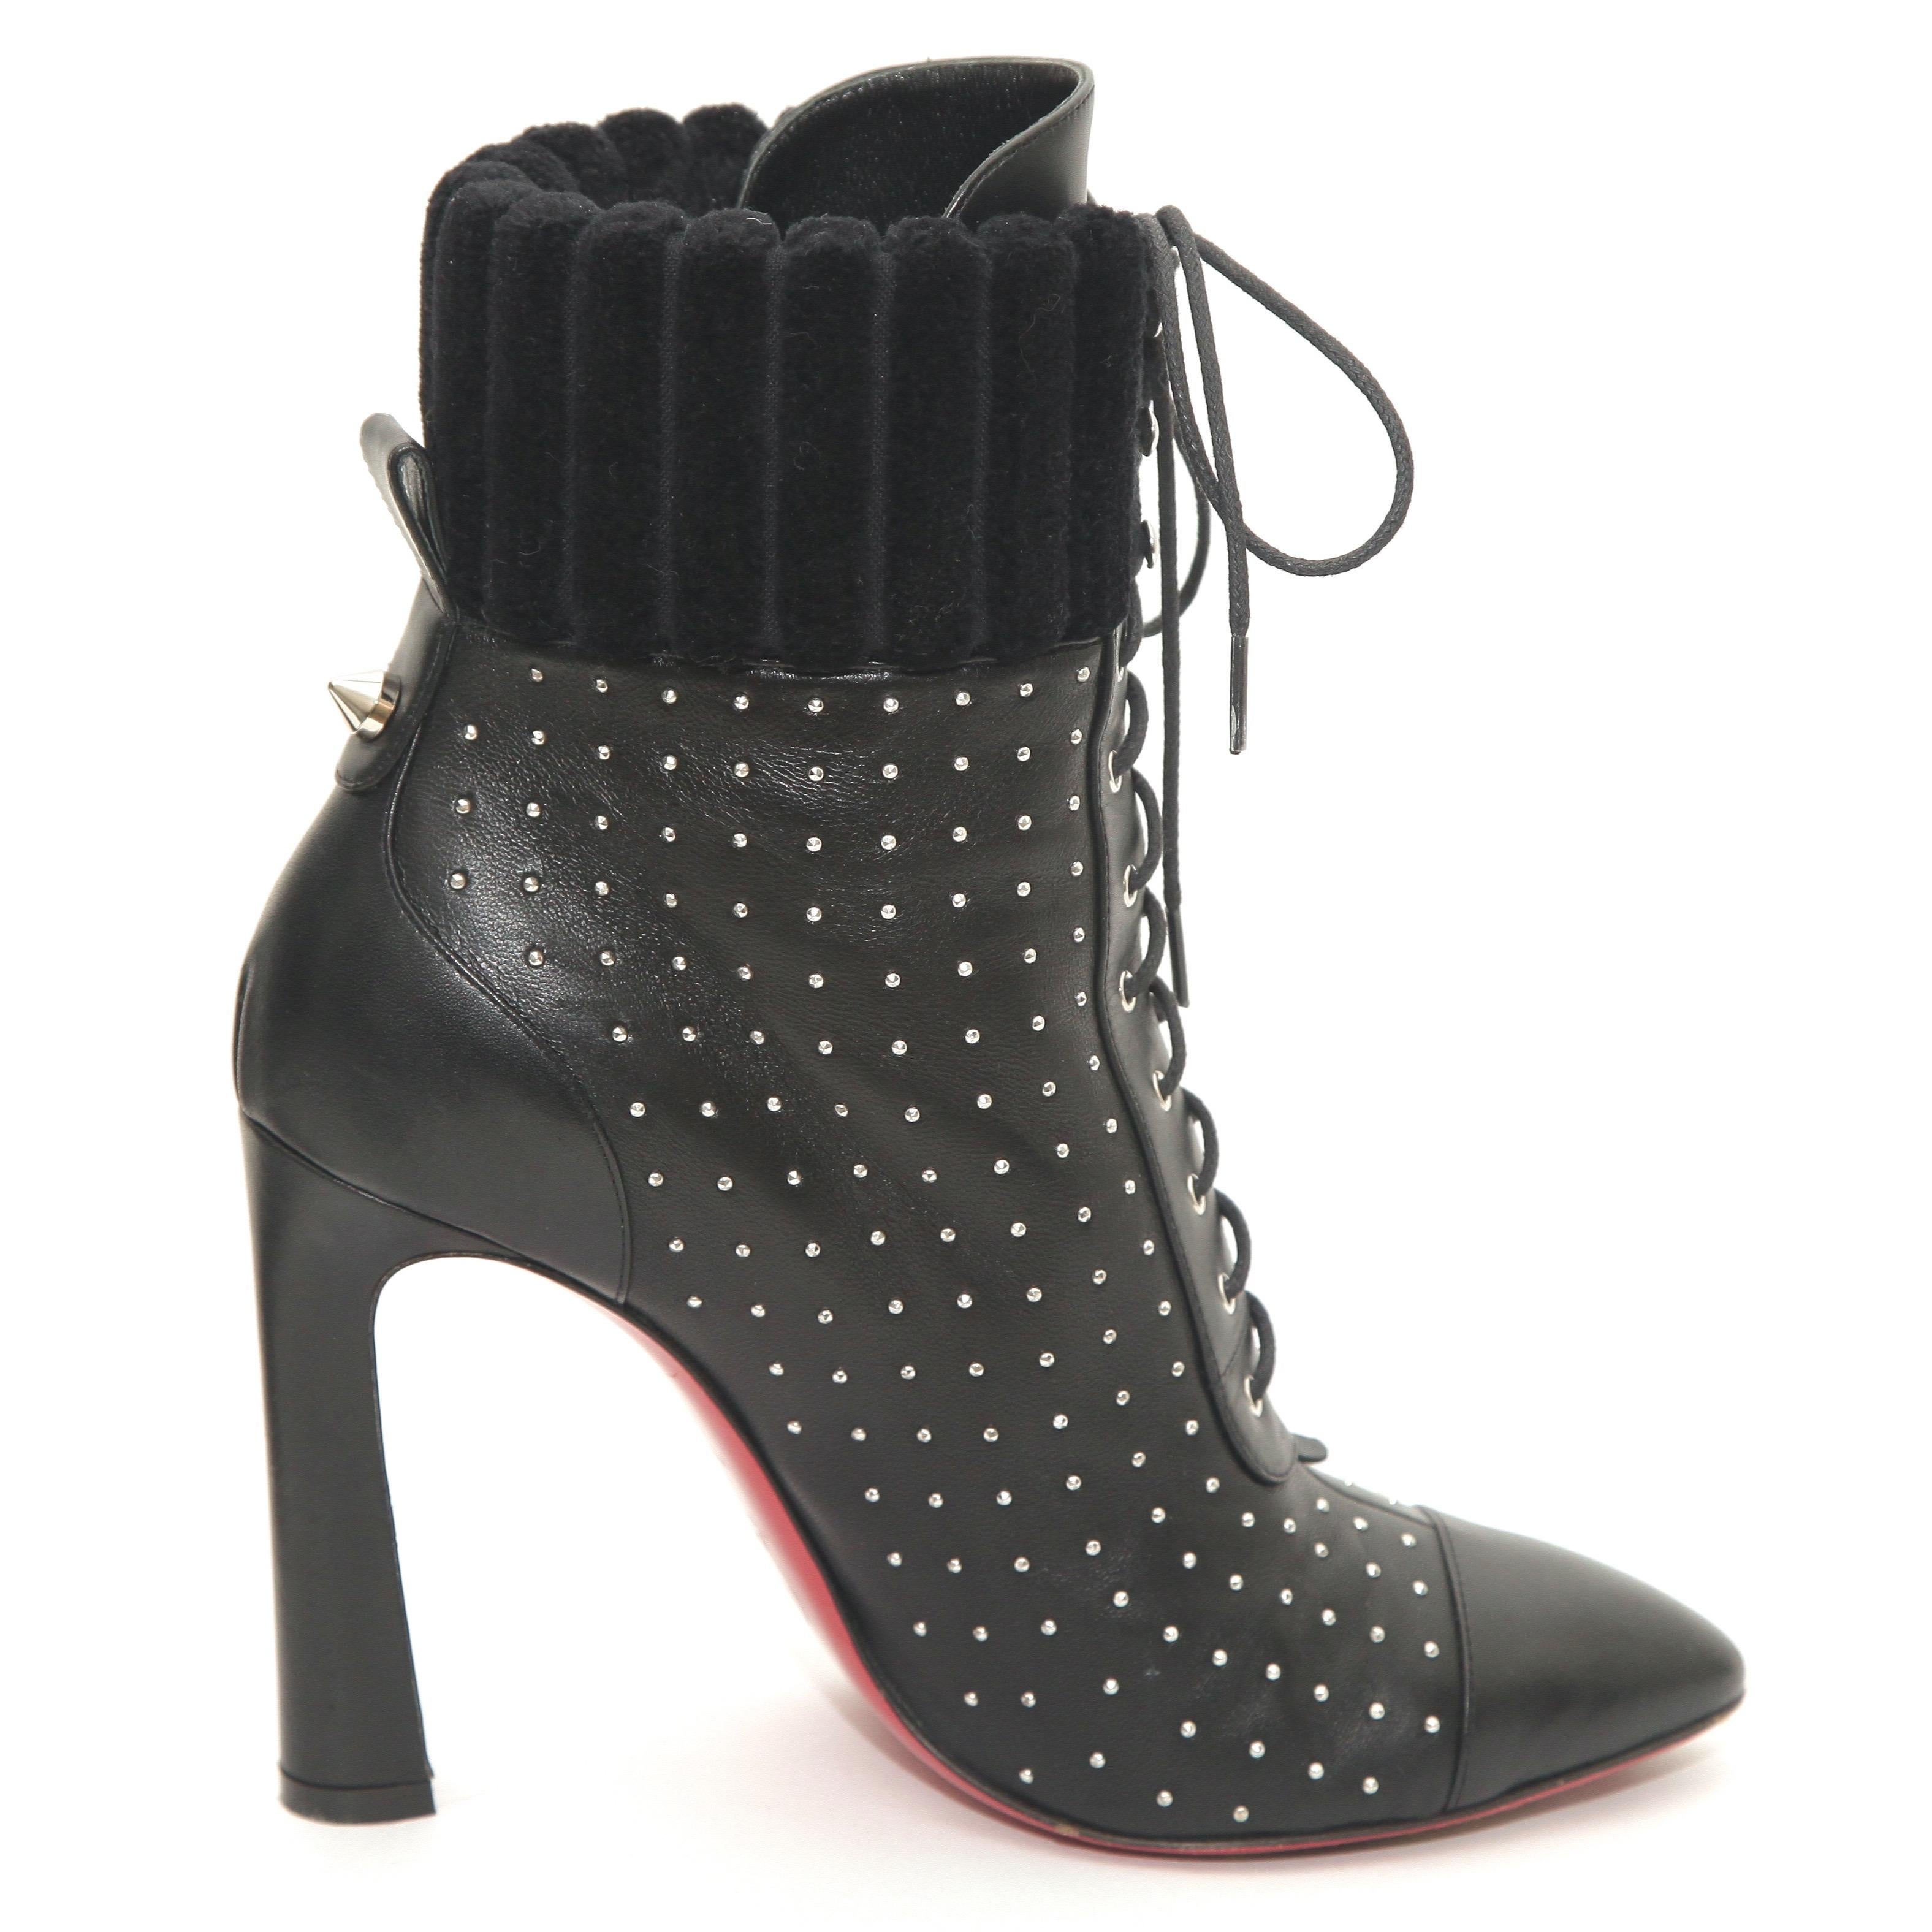 GUARANTEED AUTHENTIC CHRISTIAN LOUBOUTIN SILVER STUDDED LACE UP BOOTS

Details:
- Black leather uppers.
- Tiny silver studs throughout.
- Lace-up front.
- Fabric trim around top.
- Almond cap toe.
- Leather insoles/soles.
- Comes with dust